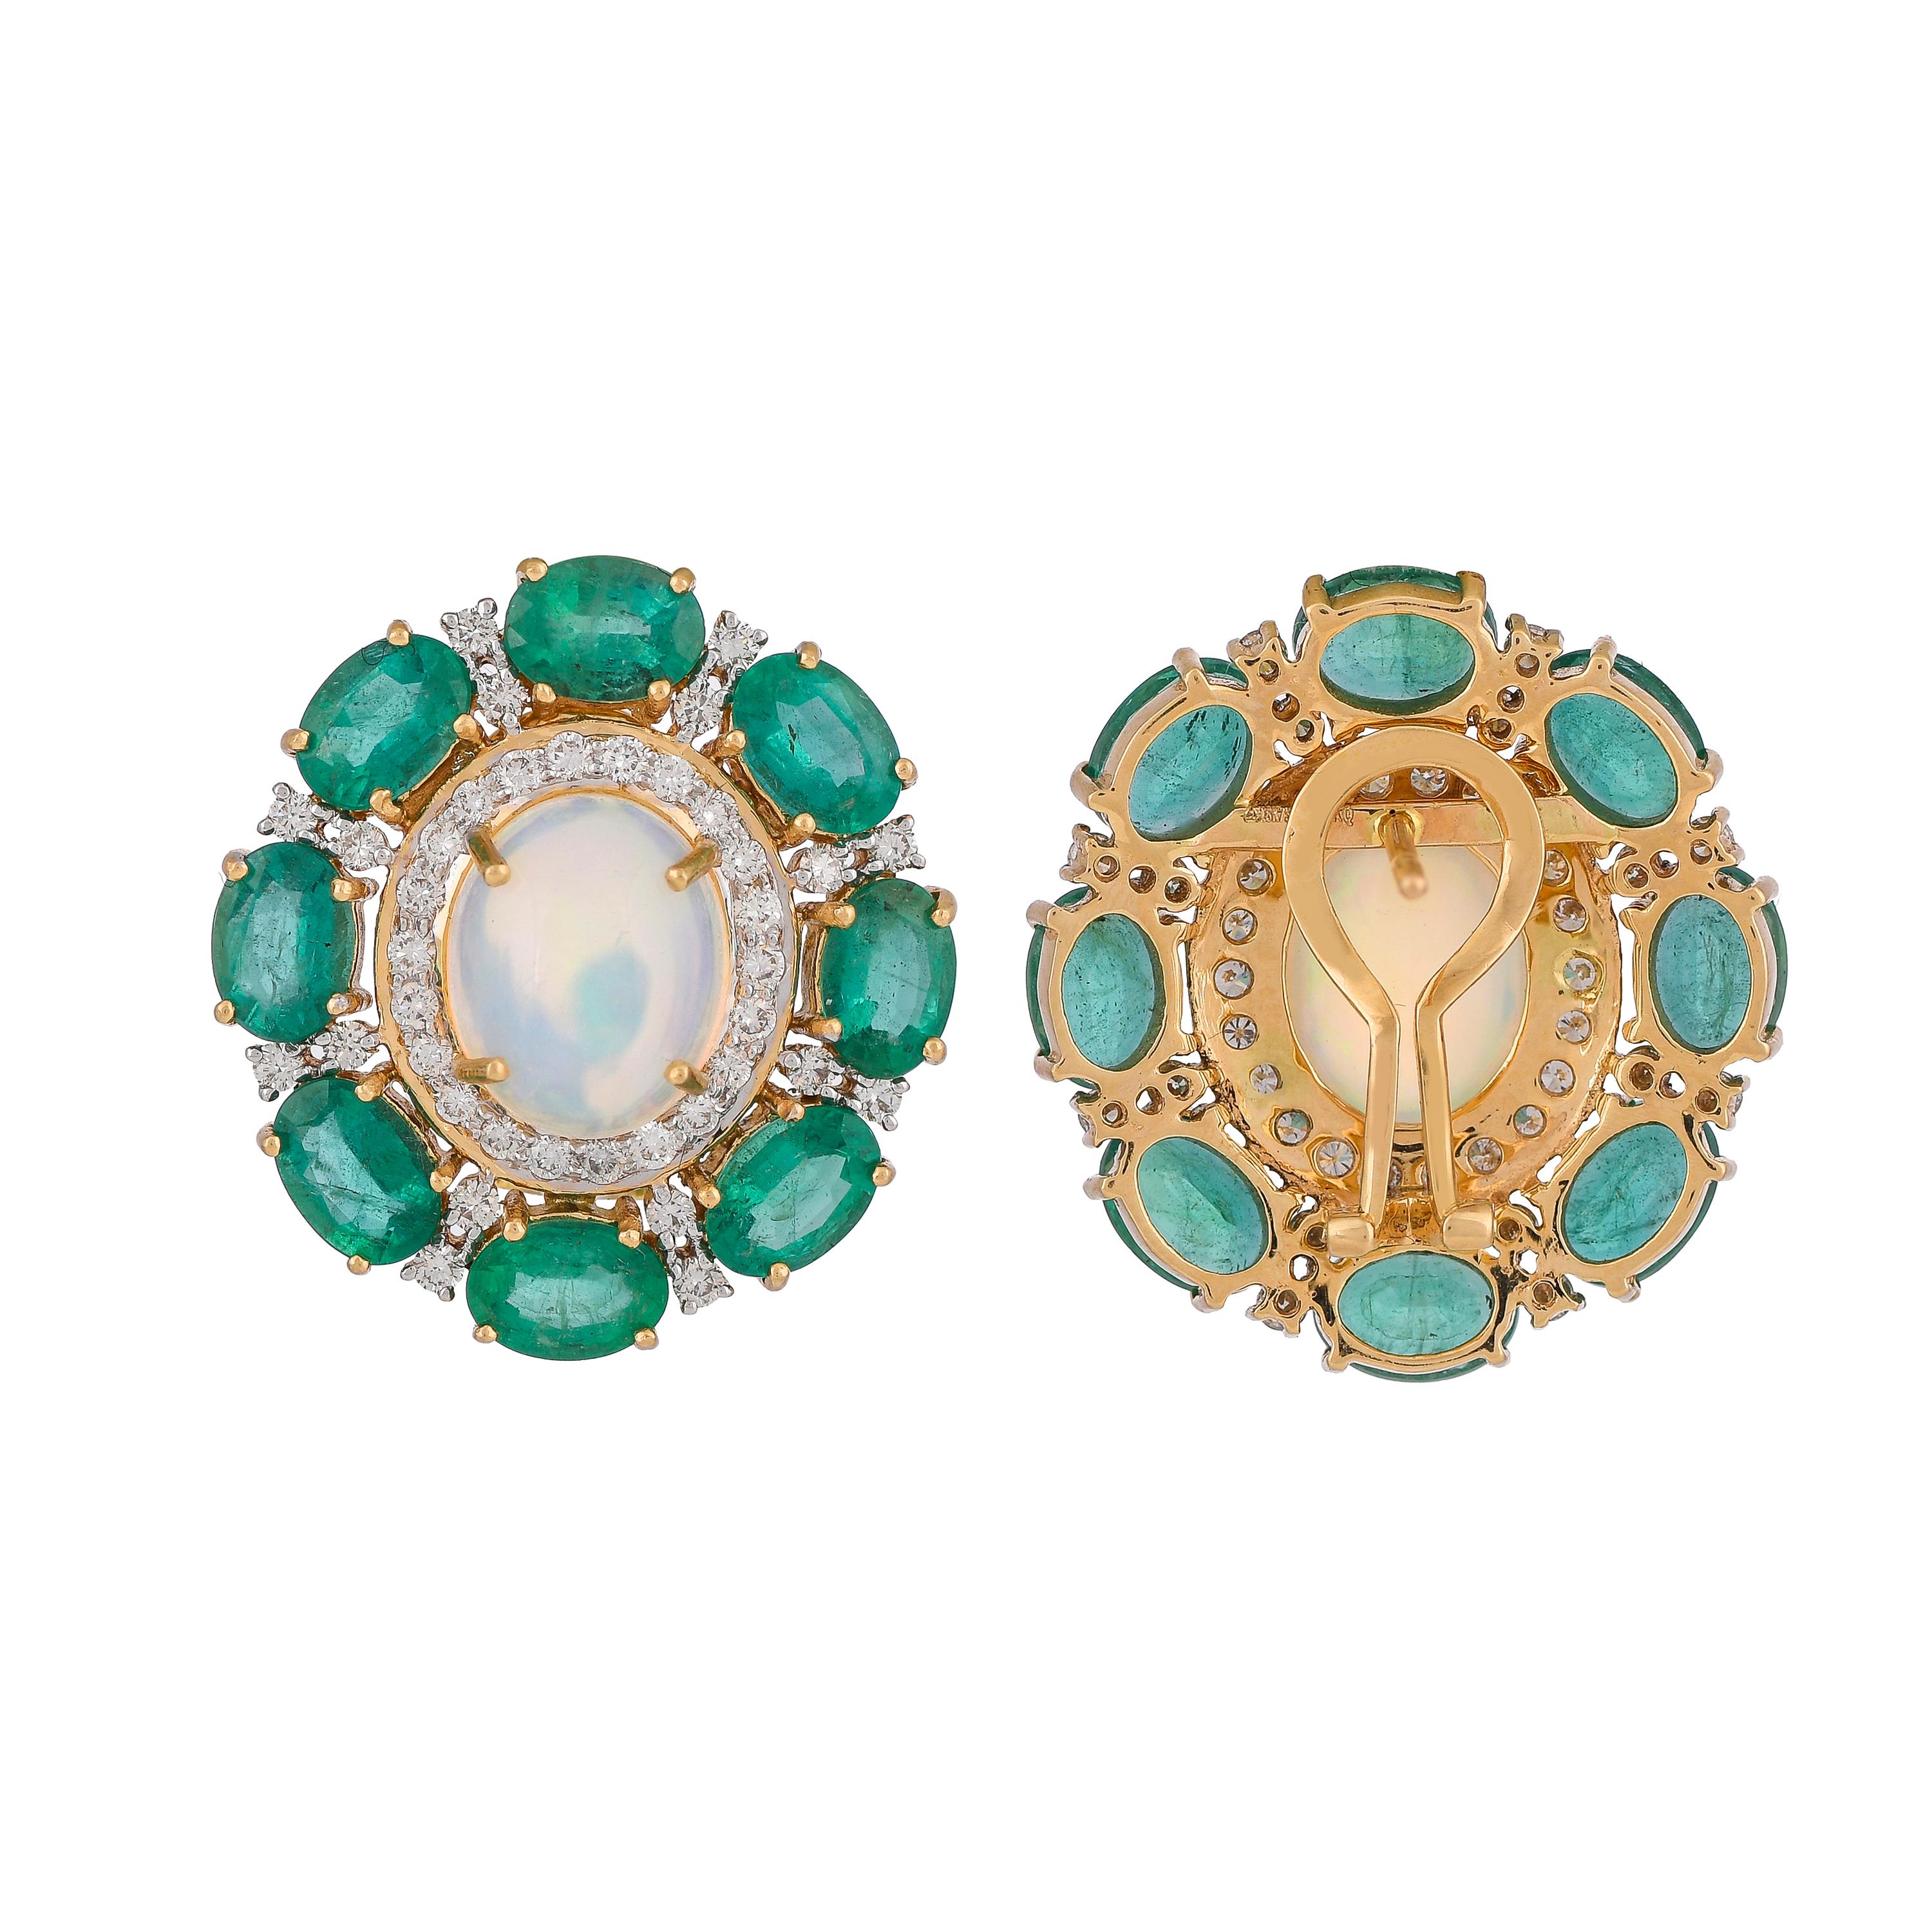 Cabochon 11.59 Carat Emerald Ethiopian Opal and Diamond 18kt Yellow Gold Stud Earrings For Sale